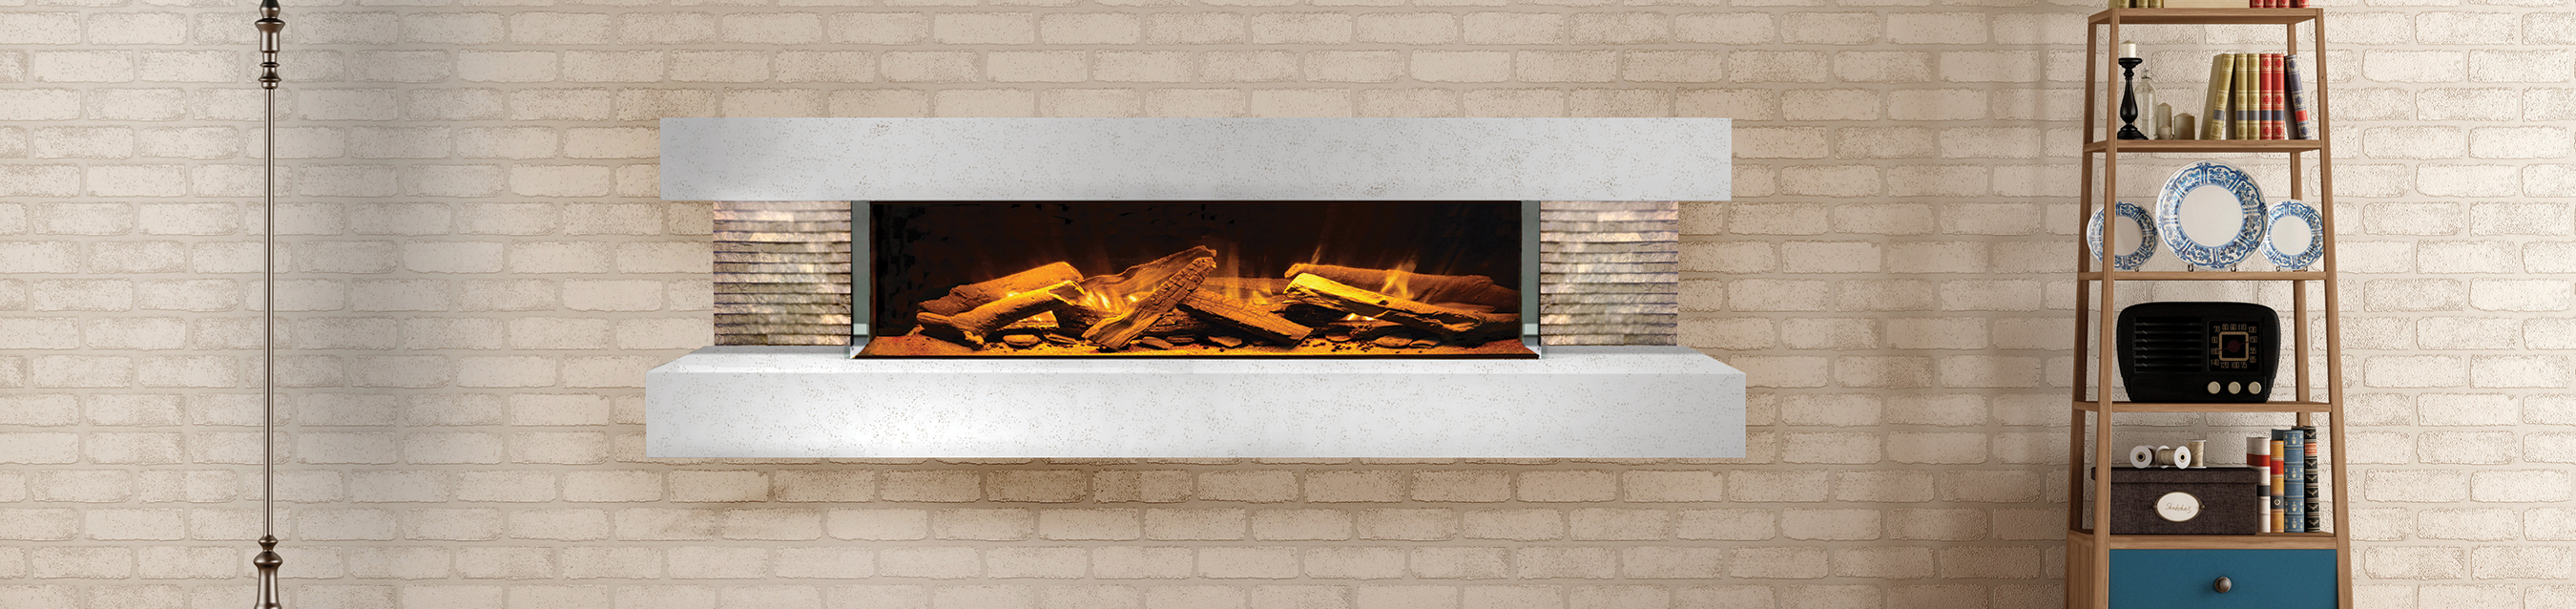 Compton 1000 linear electric fireplace by European Home